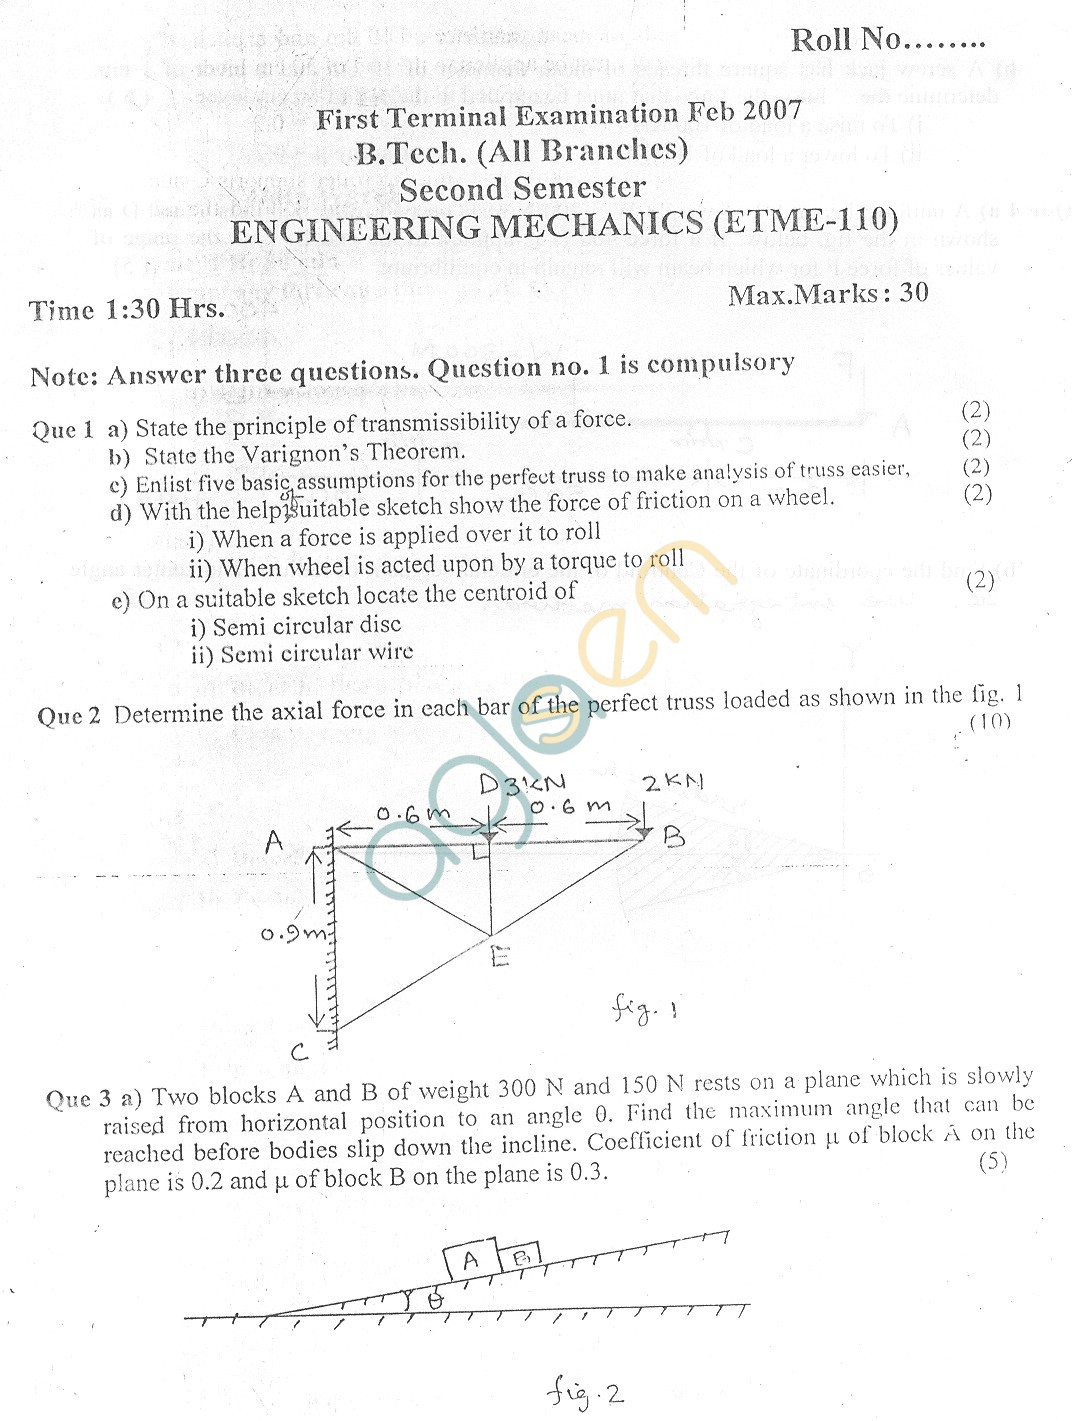 GGSIPU Question Papers Second Semester  First Term 2007  ETME-110